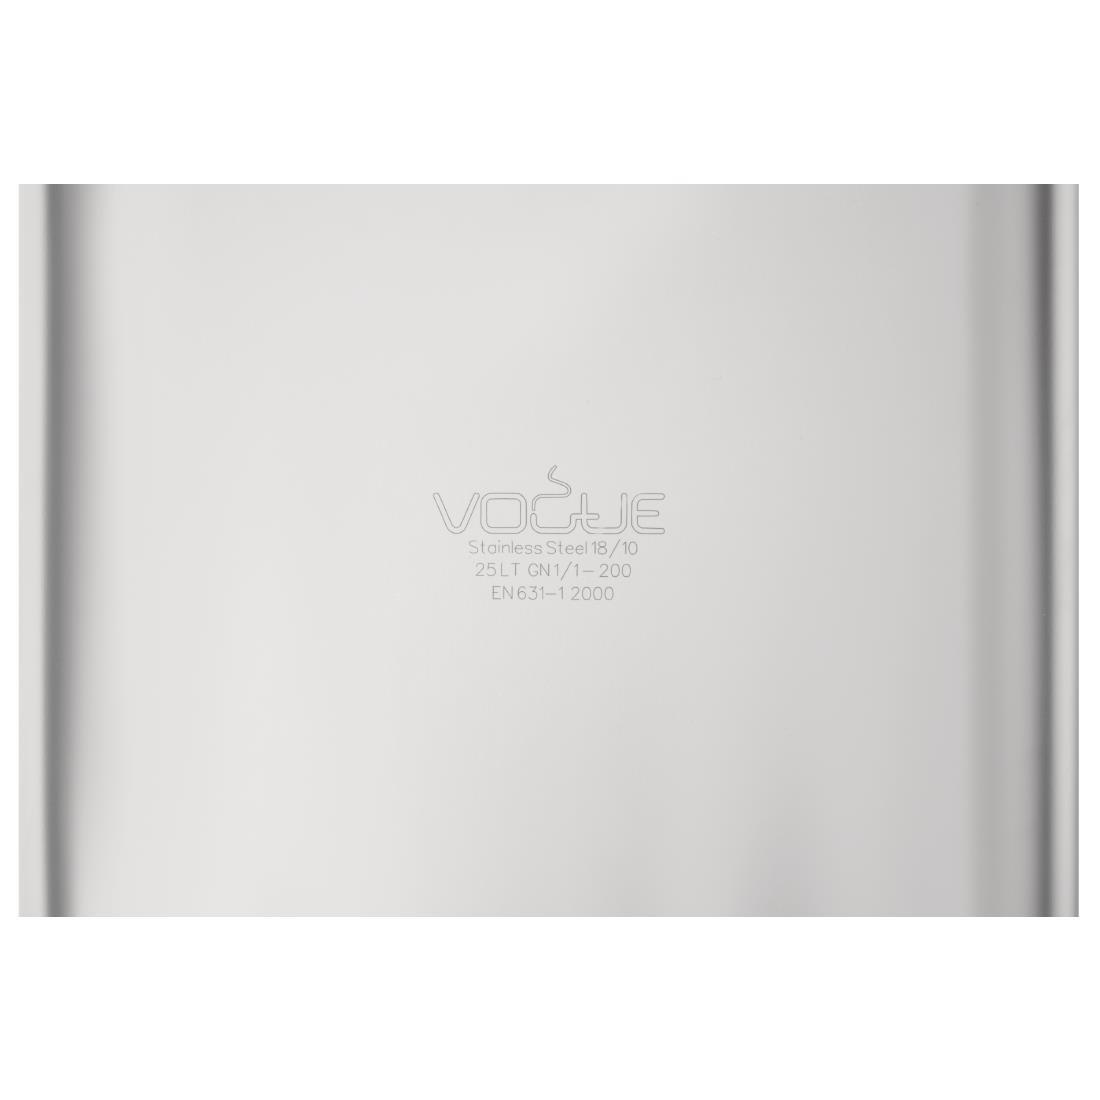 Vogue Heavy Duty Stainless Steel 1/1 Gastronorm Pan 200mm - DW436  - 6